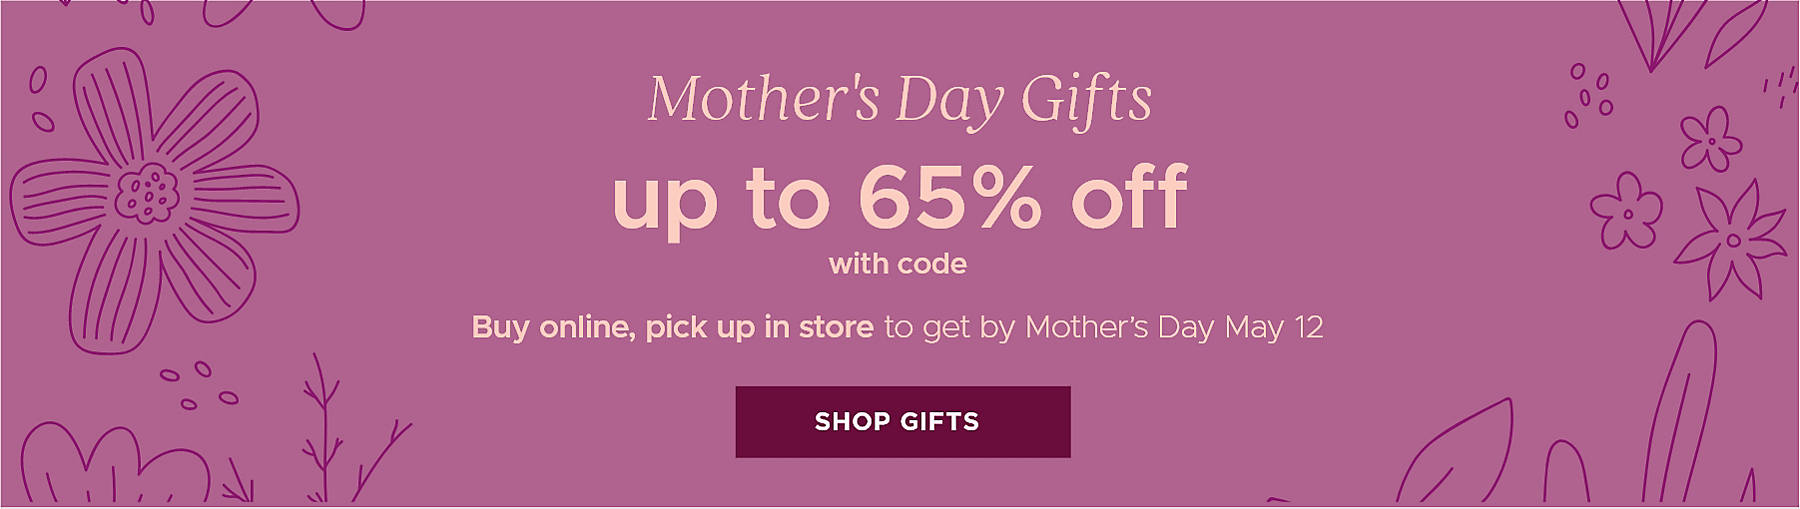 Mother's Day Gifts up to 65% off with code Buy online, pick up in store to get by Mother's Day May 12 Shop Gifts